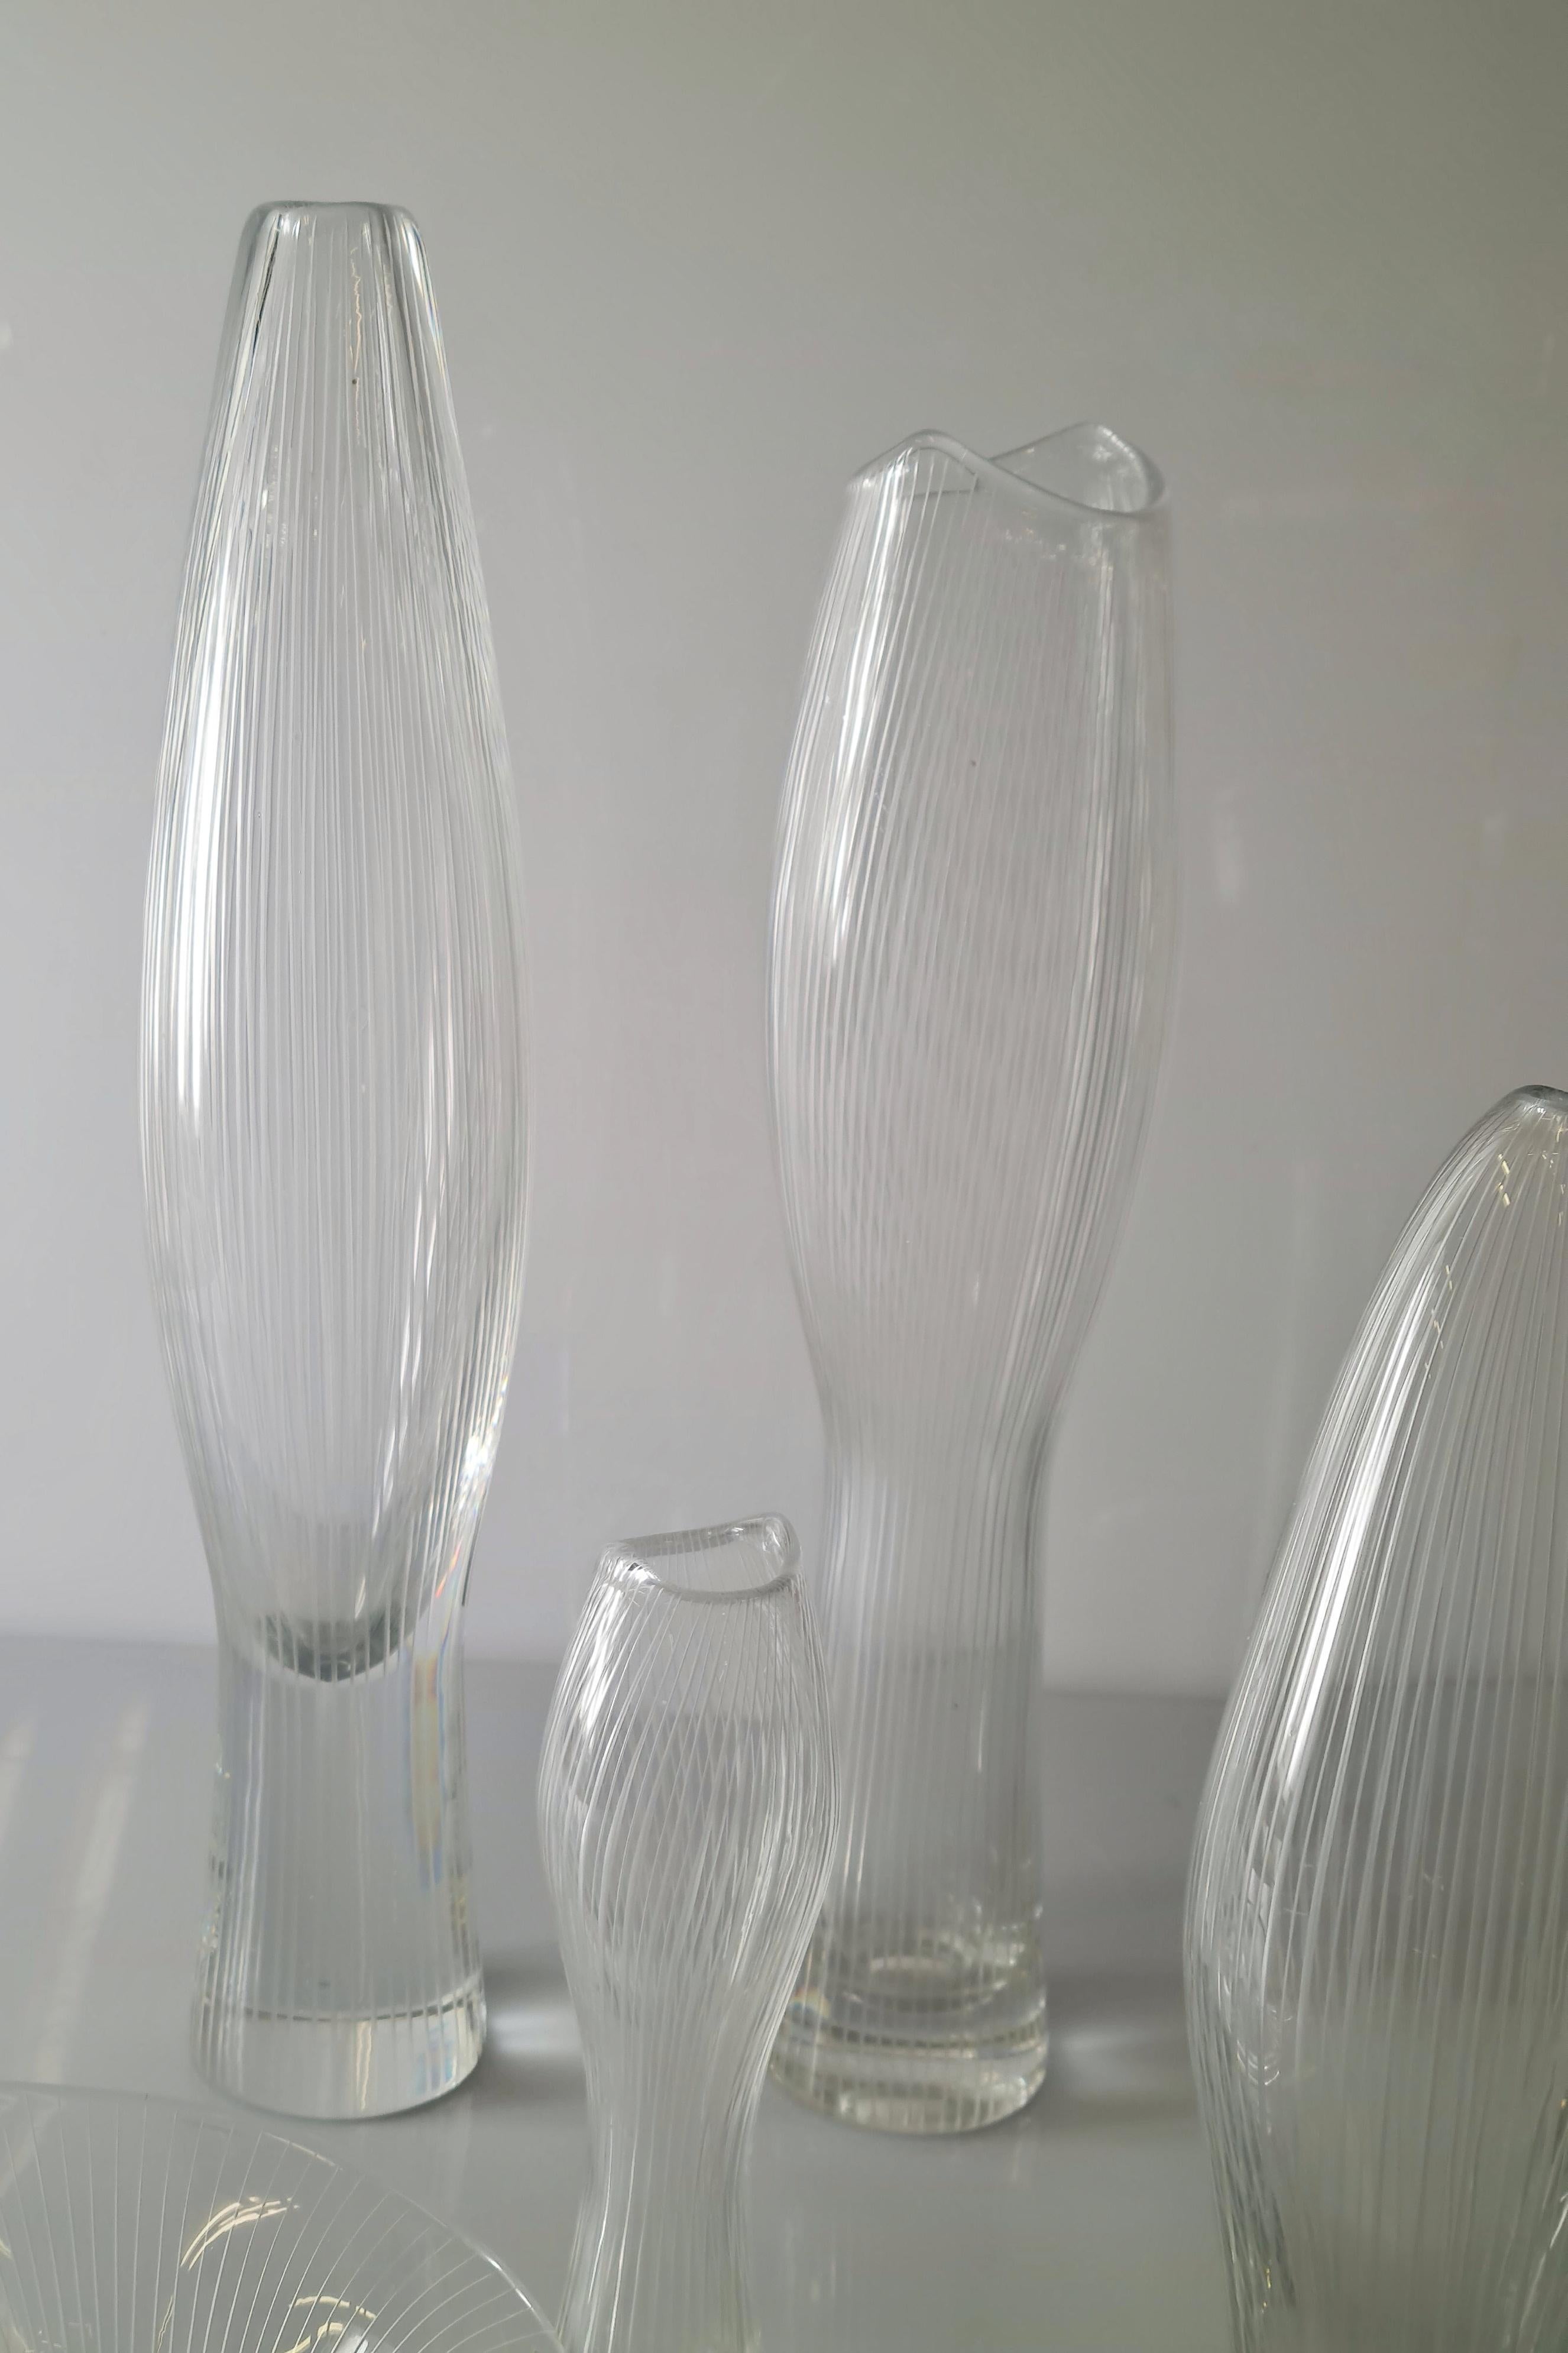 A Variety of Art Glass Objects by Tapio Wirkkala for Iittala, 1950s In Good Condition For Sale In Helsinki, FI